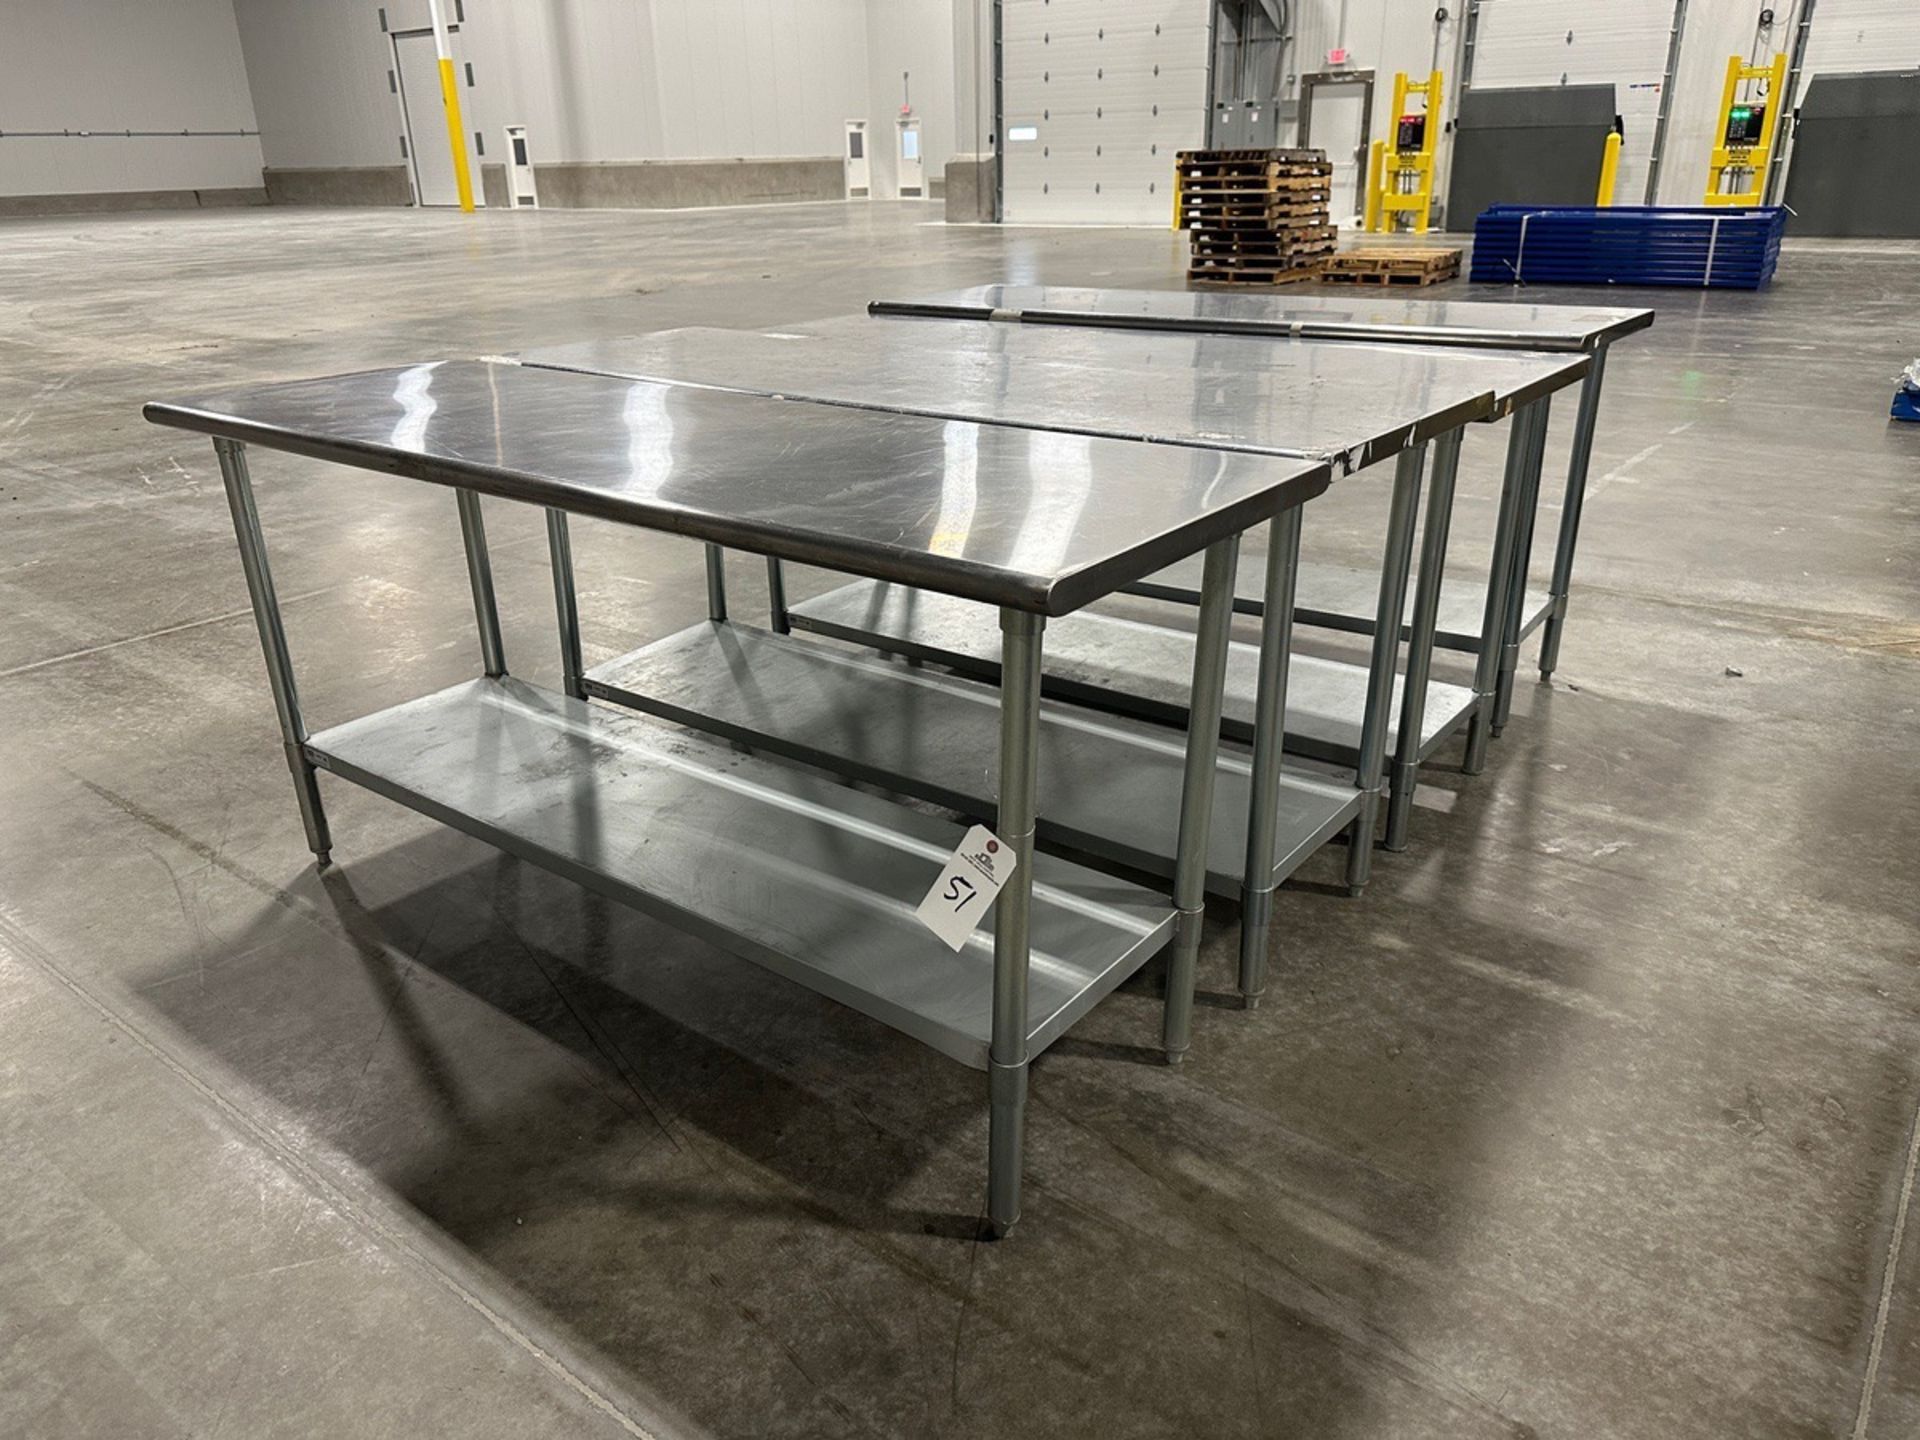 Lot of (4) Stainless Steel Tables - Approx. 2' x 6' | Rig Fee $50